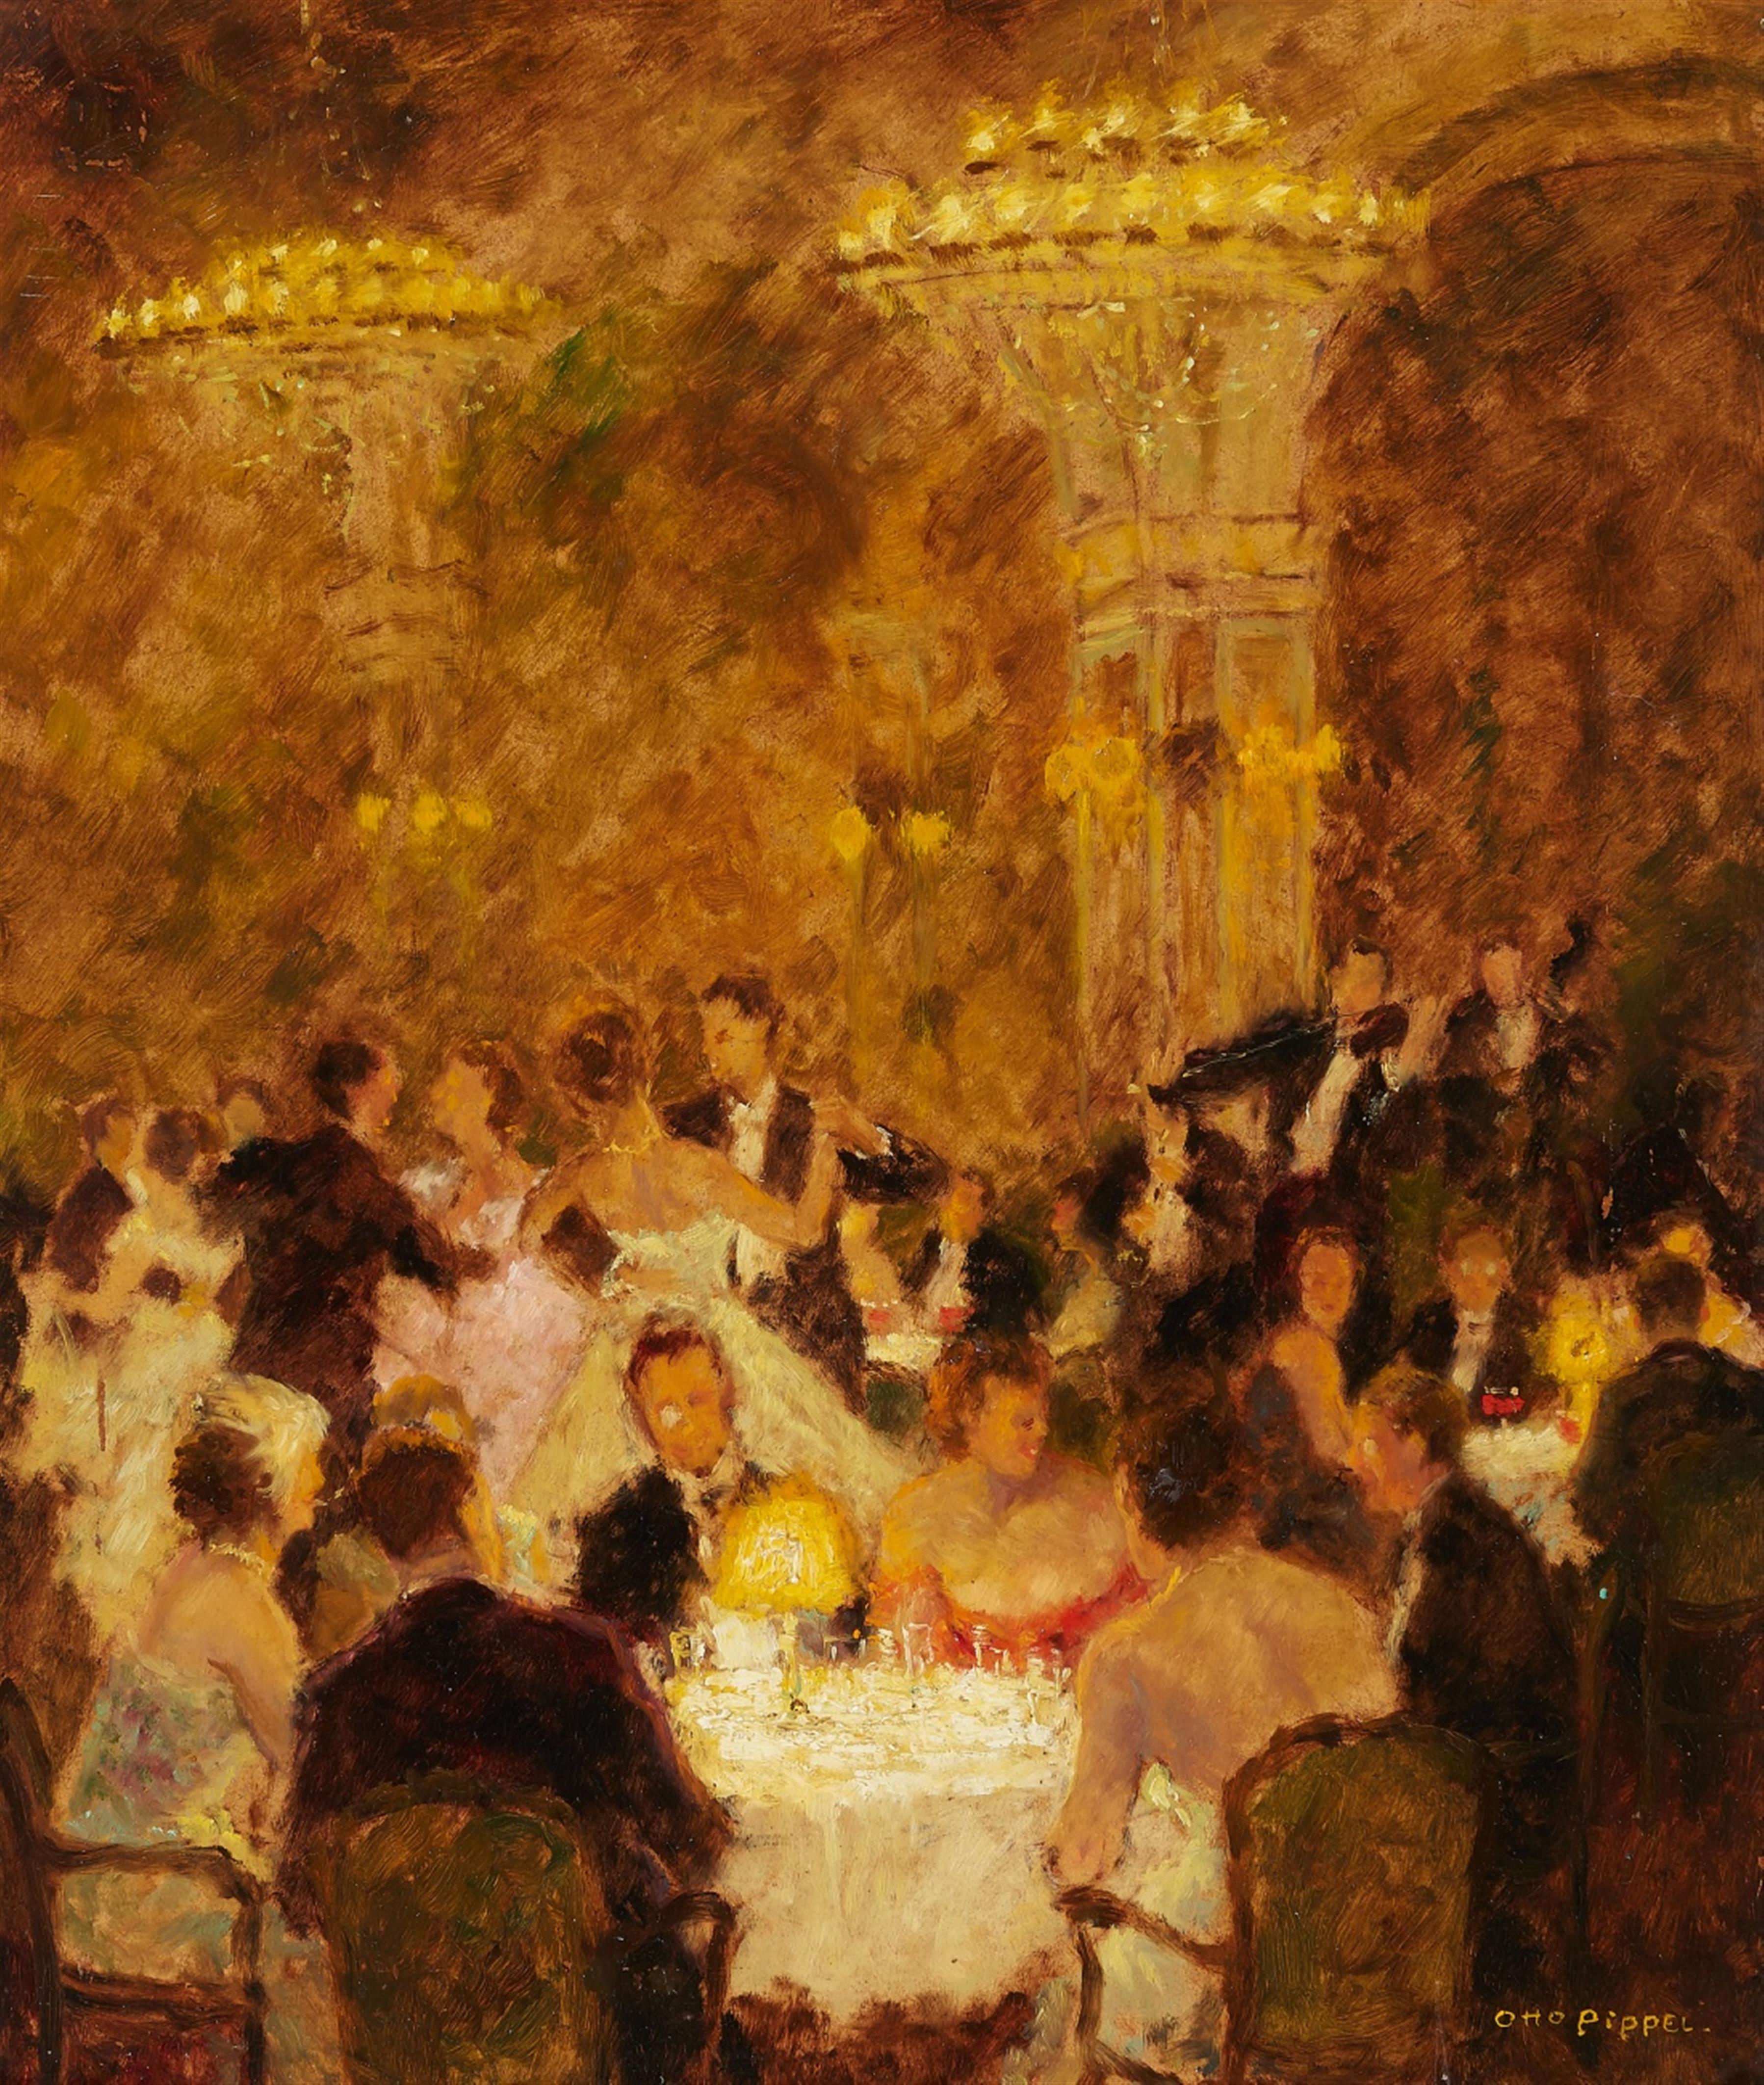 Otto Pippel - At the Ball - image-1